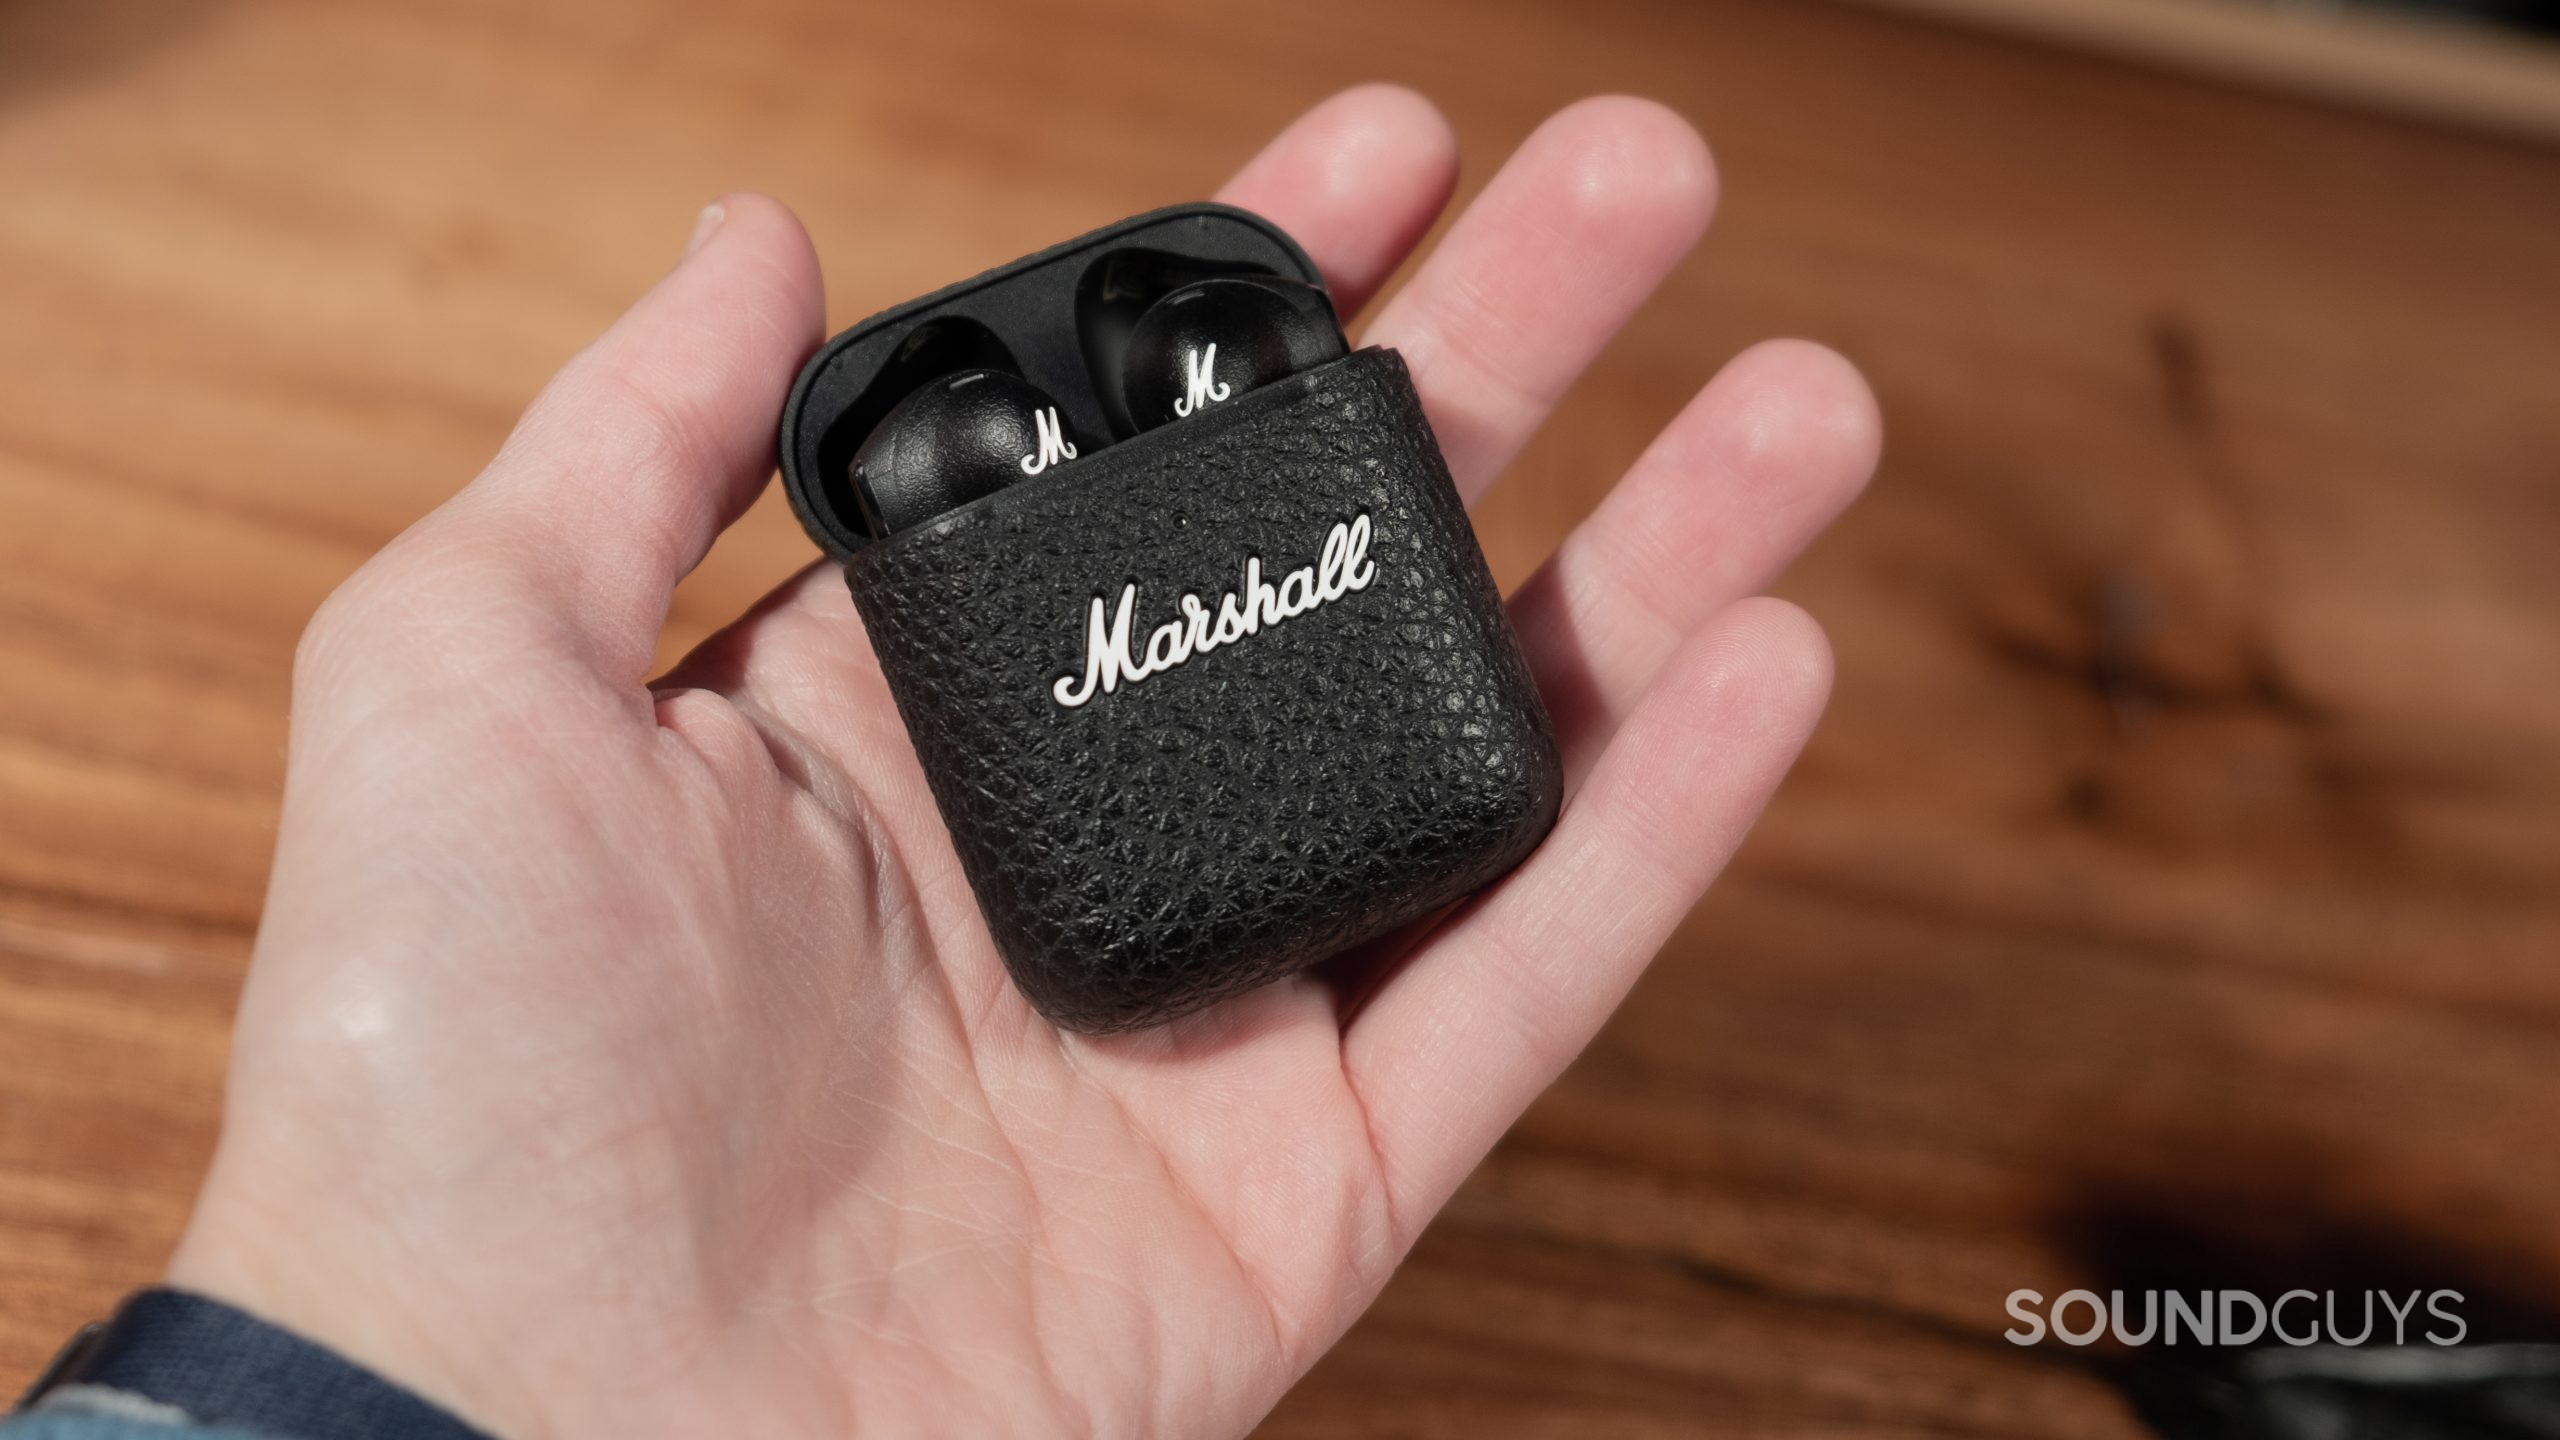 In a hand the Marshall Minor III with the lid open showing the buds.